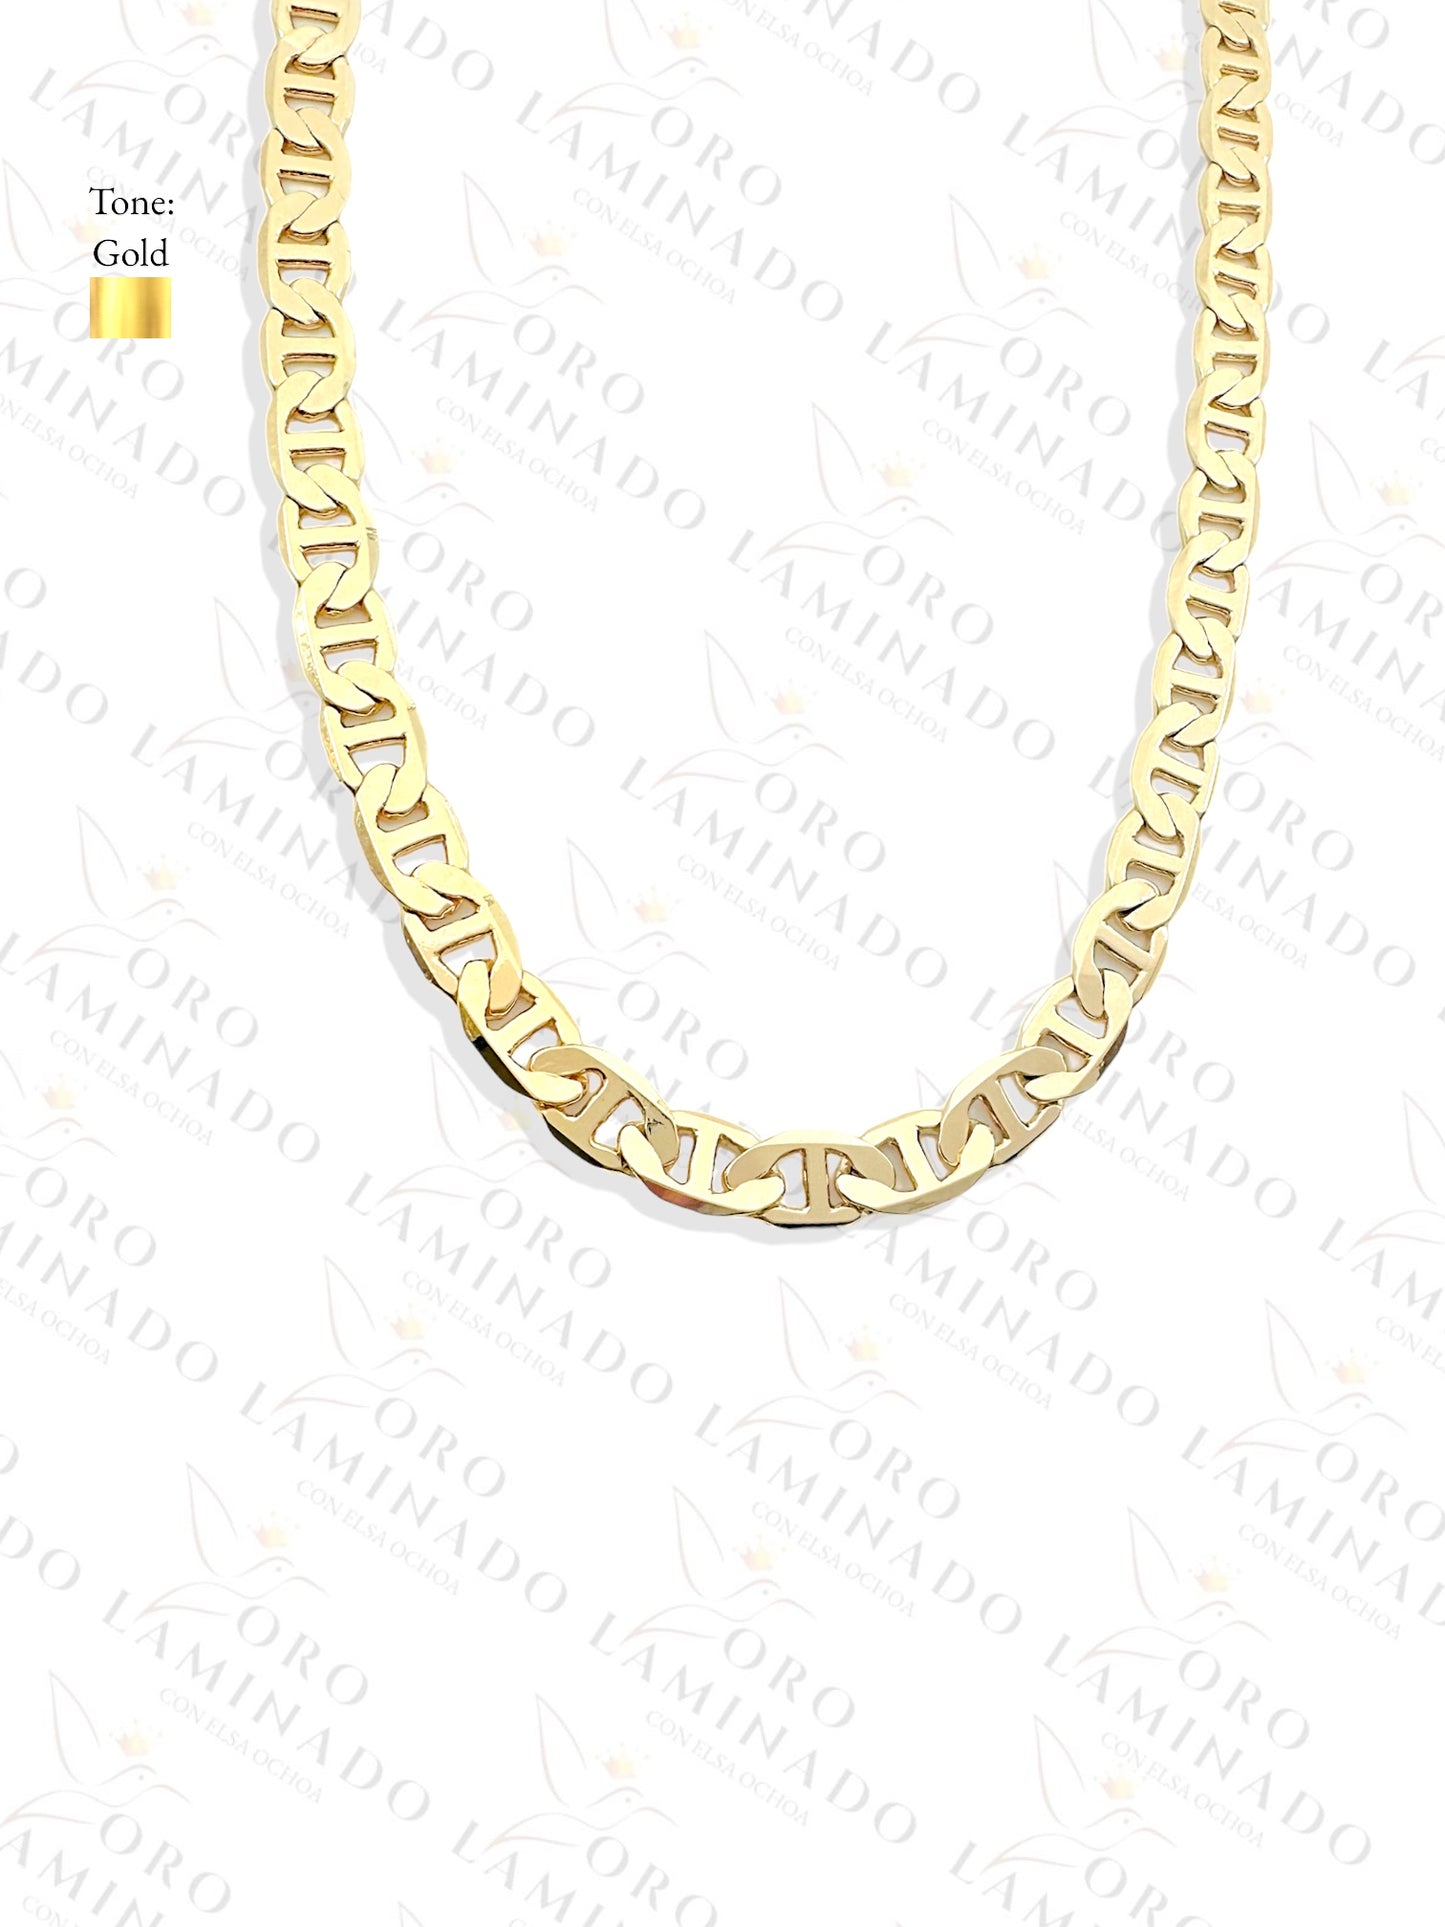 GG Chains Pack of 3 Size 28" 8mm Y410